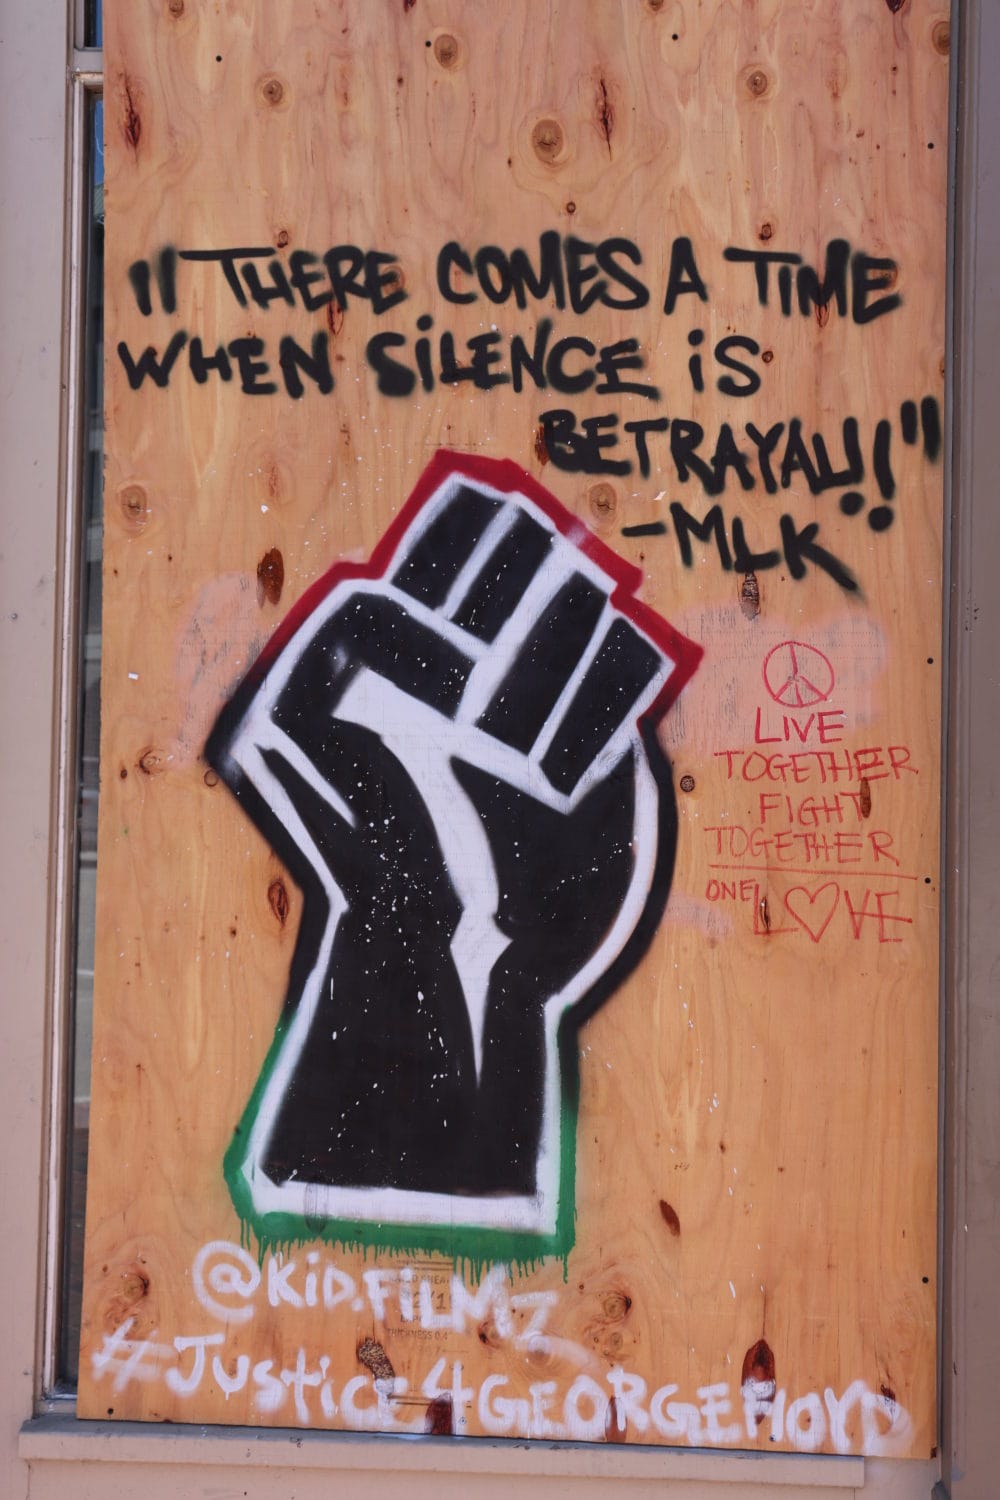 There-comes-a-time-when-silence-is-betrayal-MLK-mural-on-boarded-up-window-Oakland-0720-by-JR-1, The July expiration of the COVID-19 eviction ban and unemployment bonus leads to calls for a General Strike, Local News & Views 